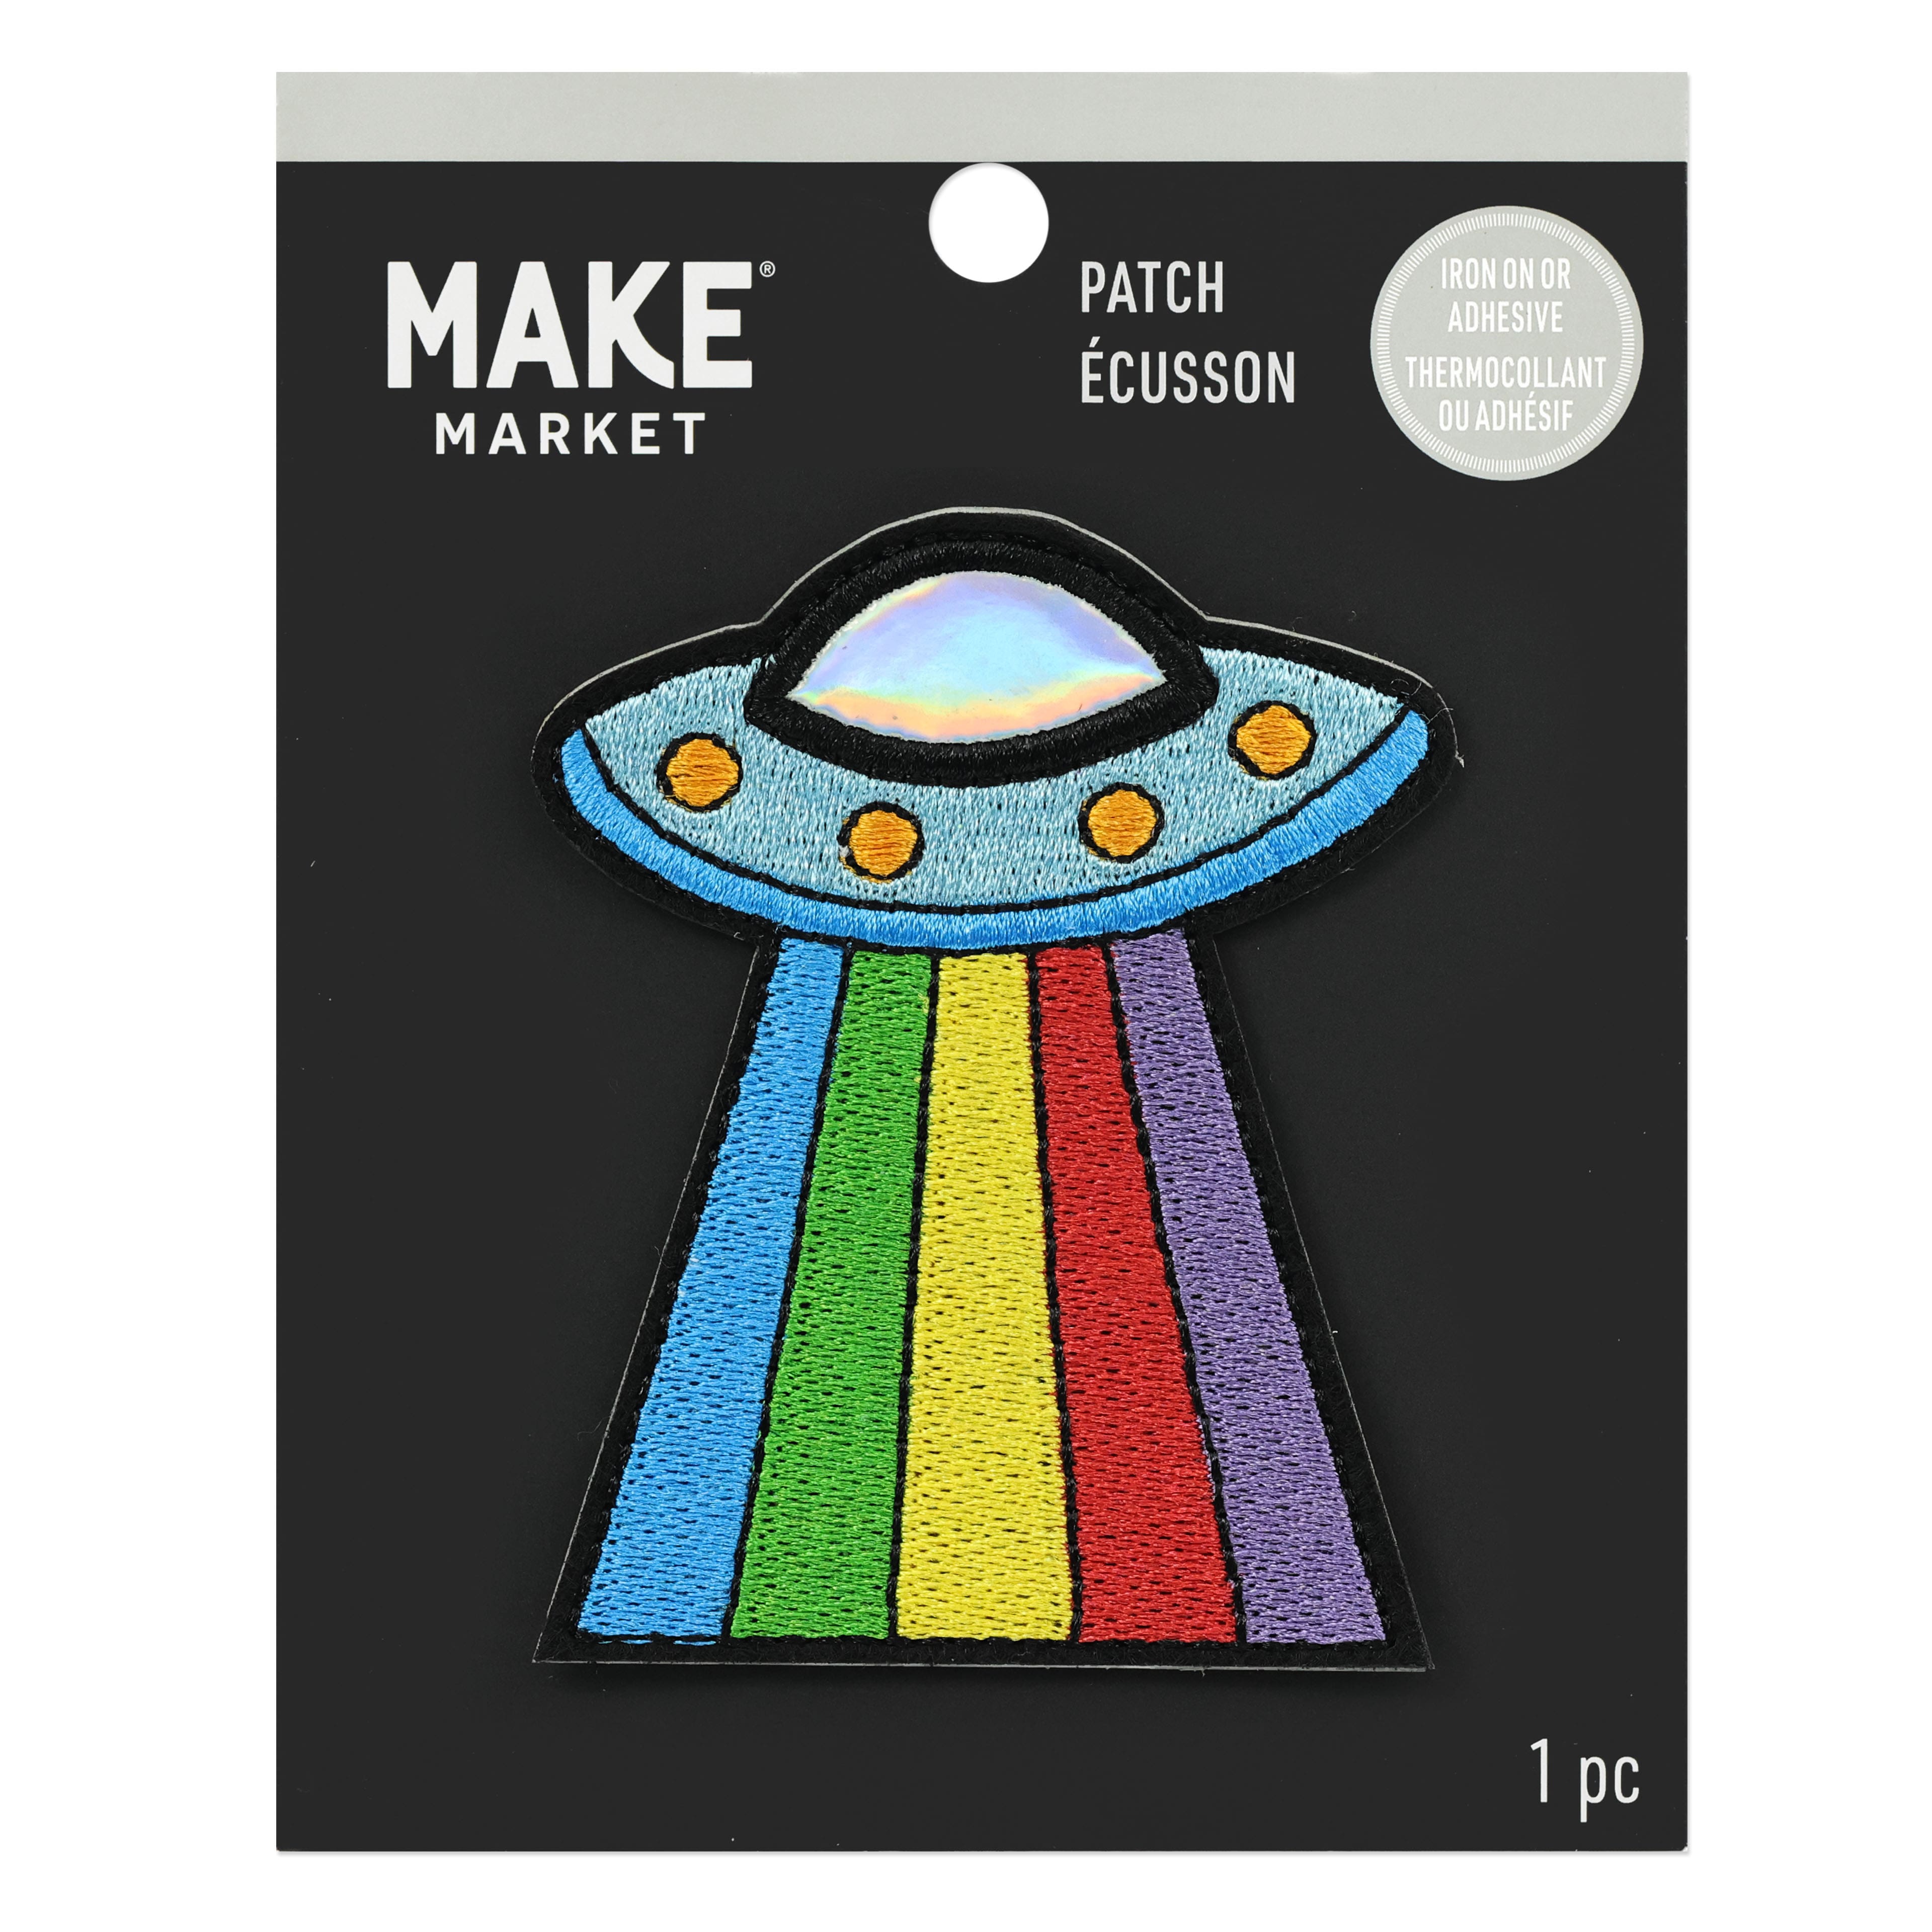 Iron-On &#x26; Adhesive Spaceship Embroidered Patch by Make Market&#xAE;